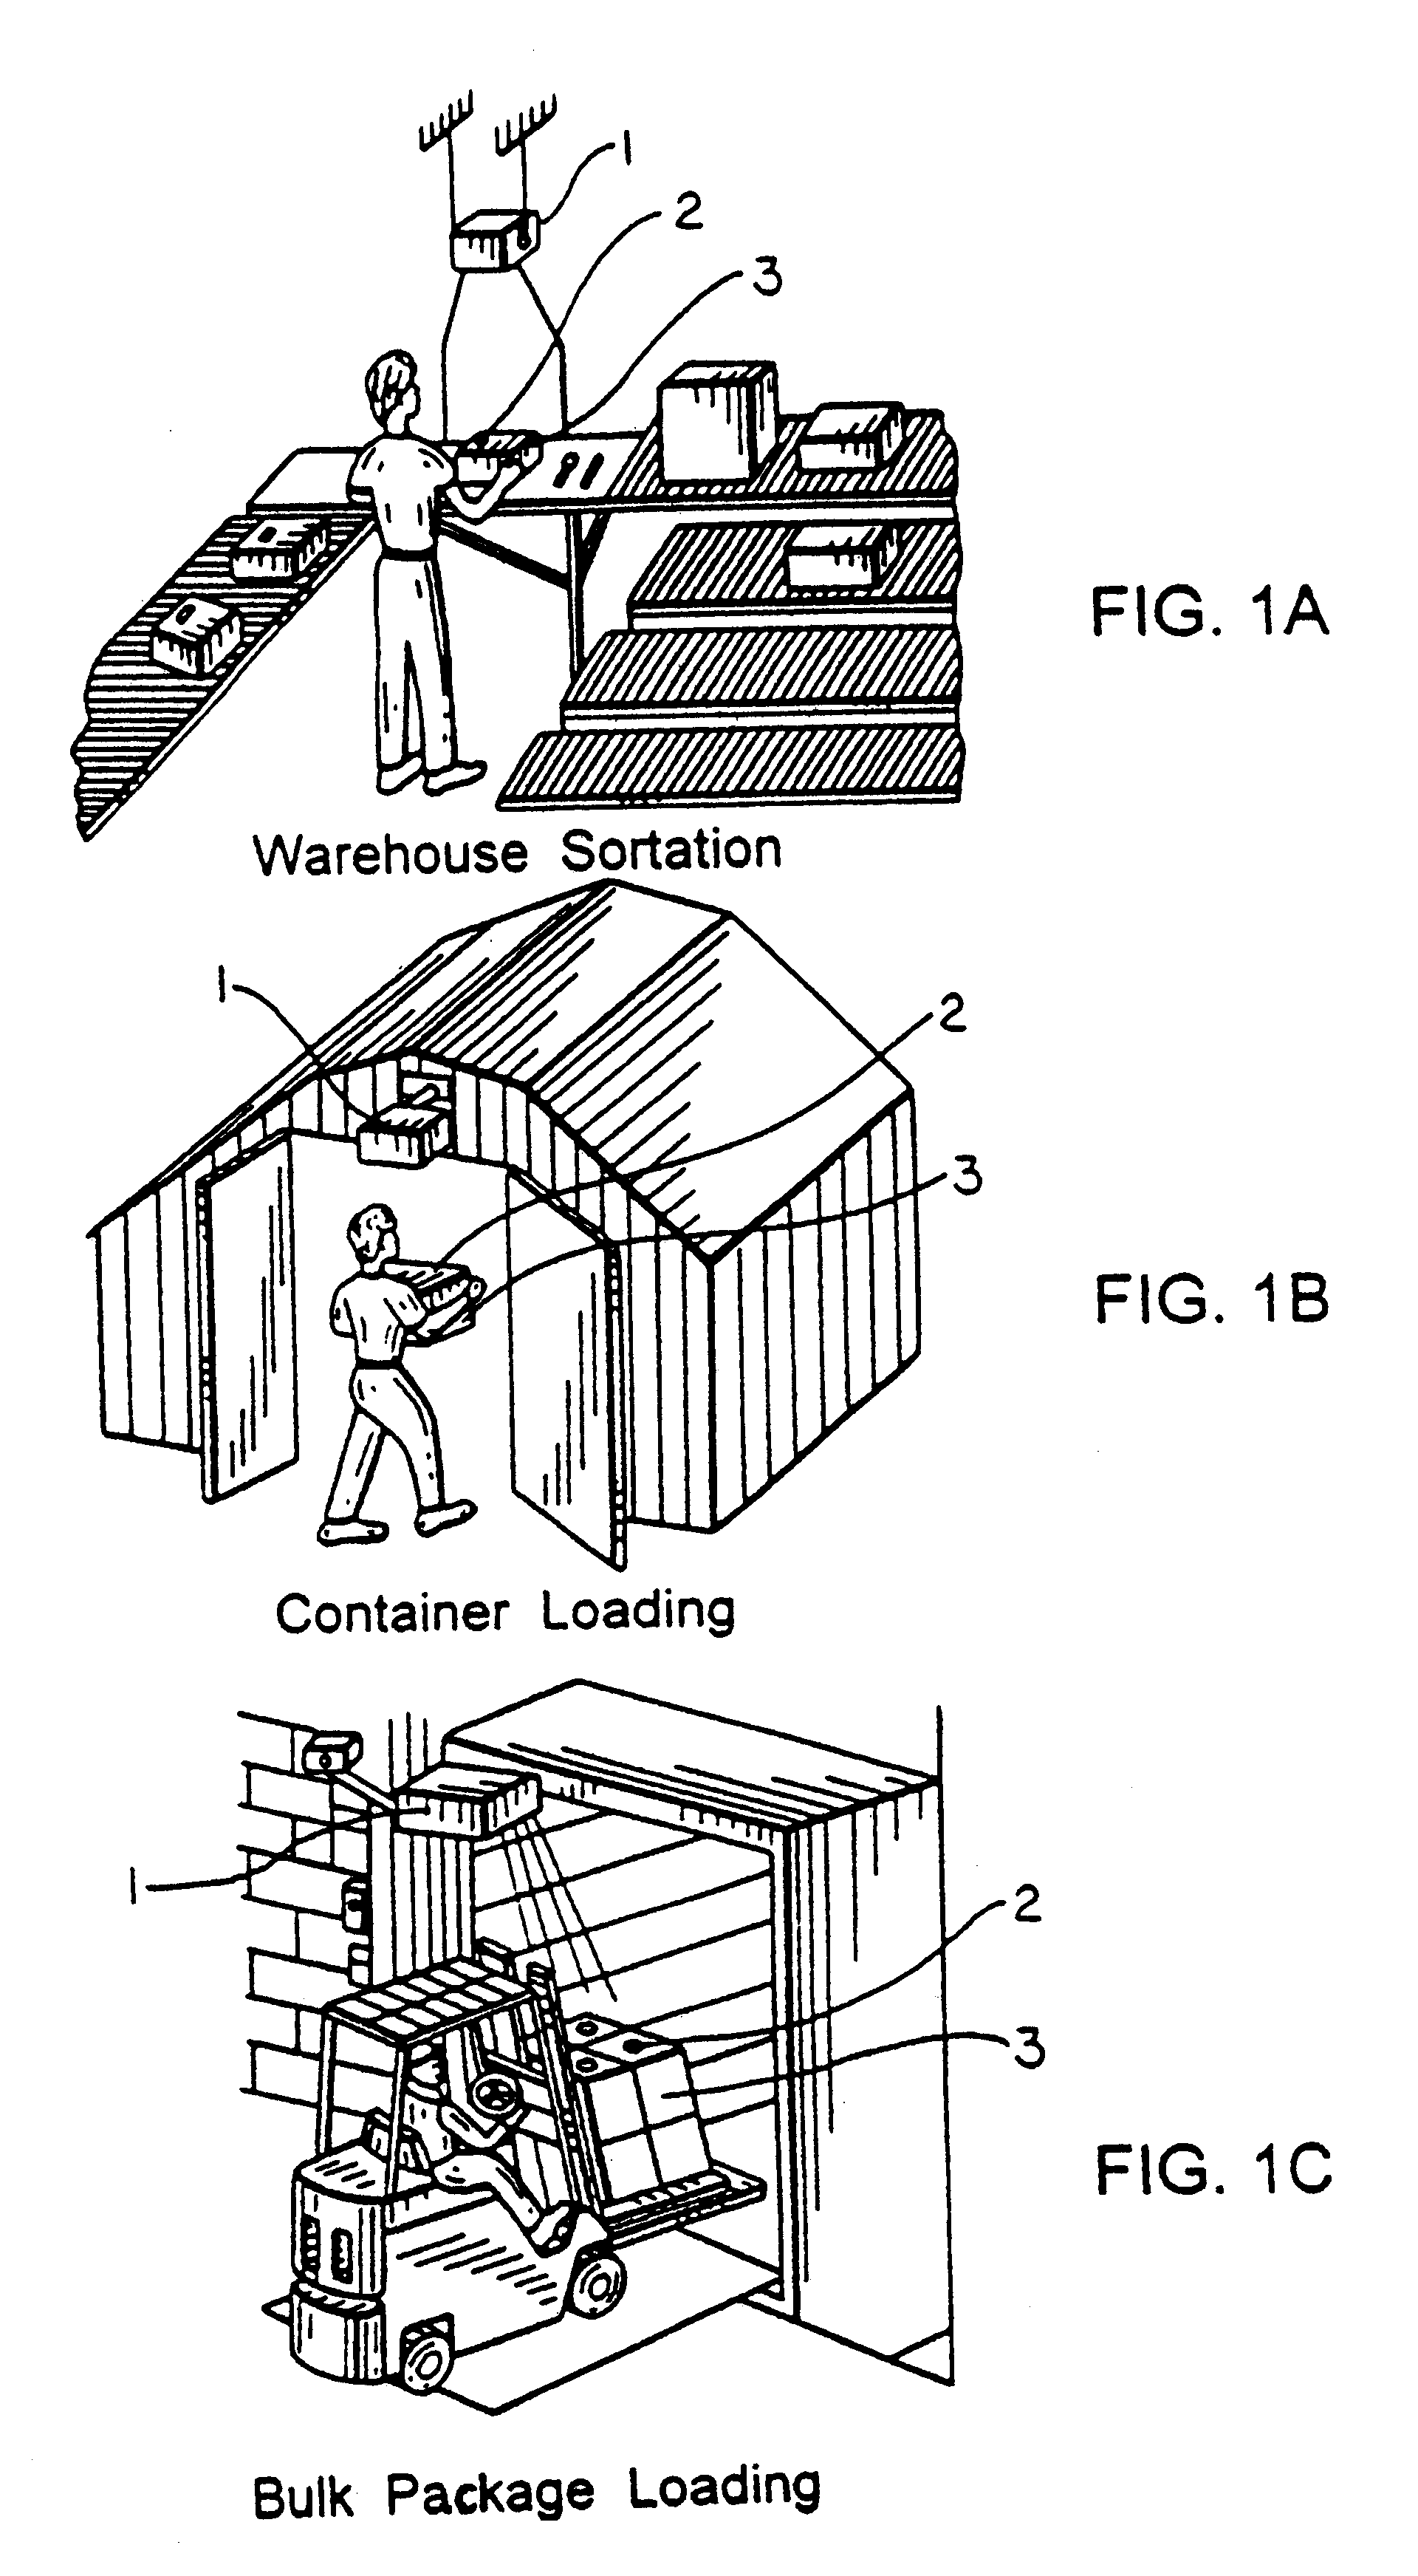 Holographic laser scanning system for carrying out light collection operations with improved light collection efficiency